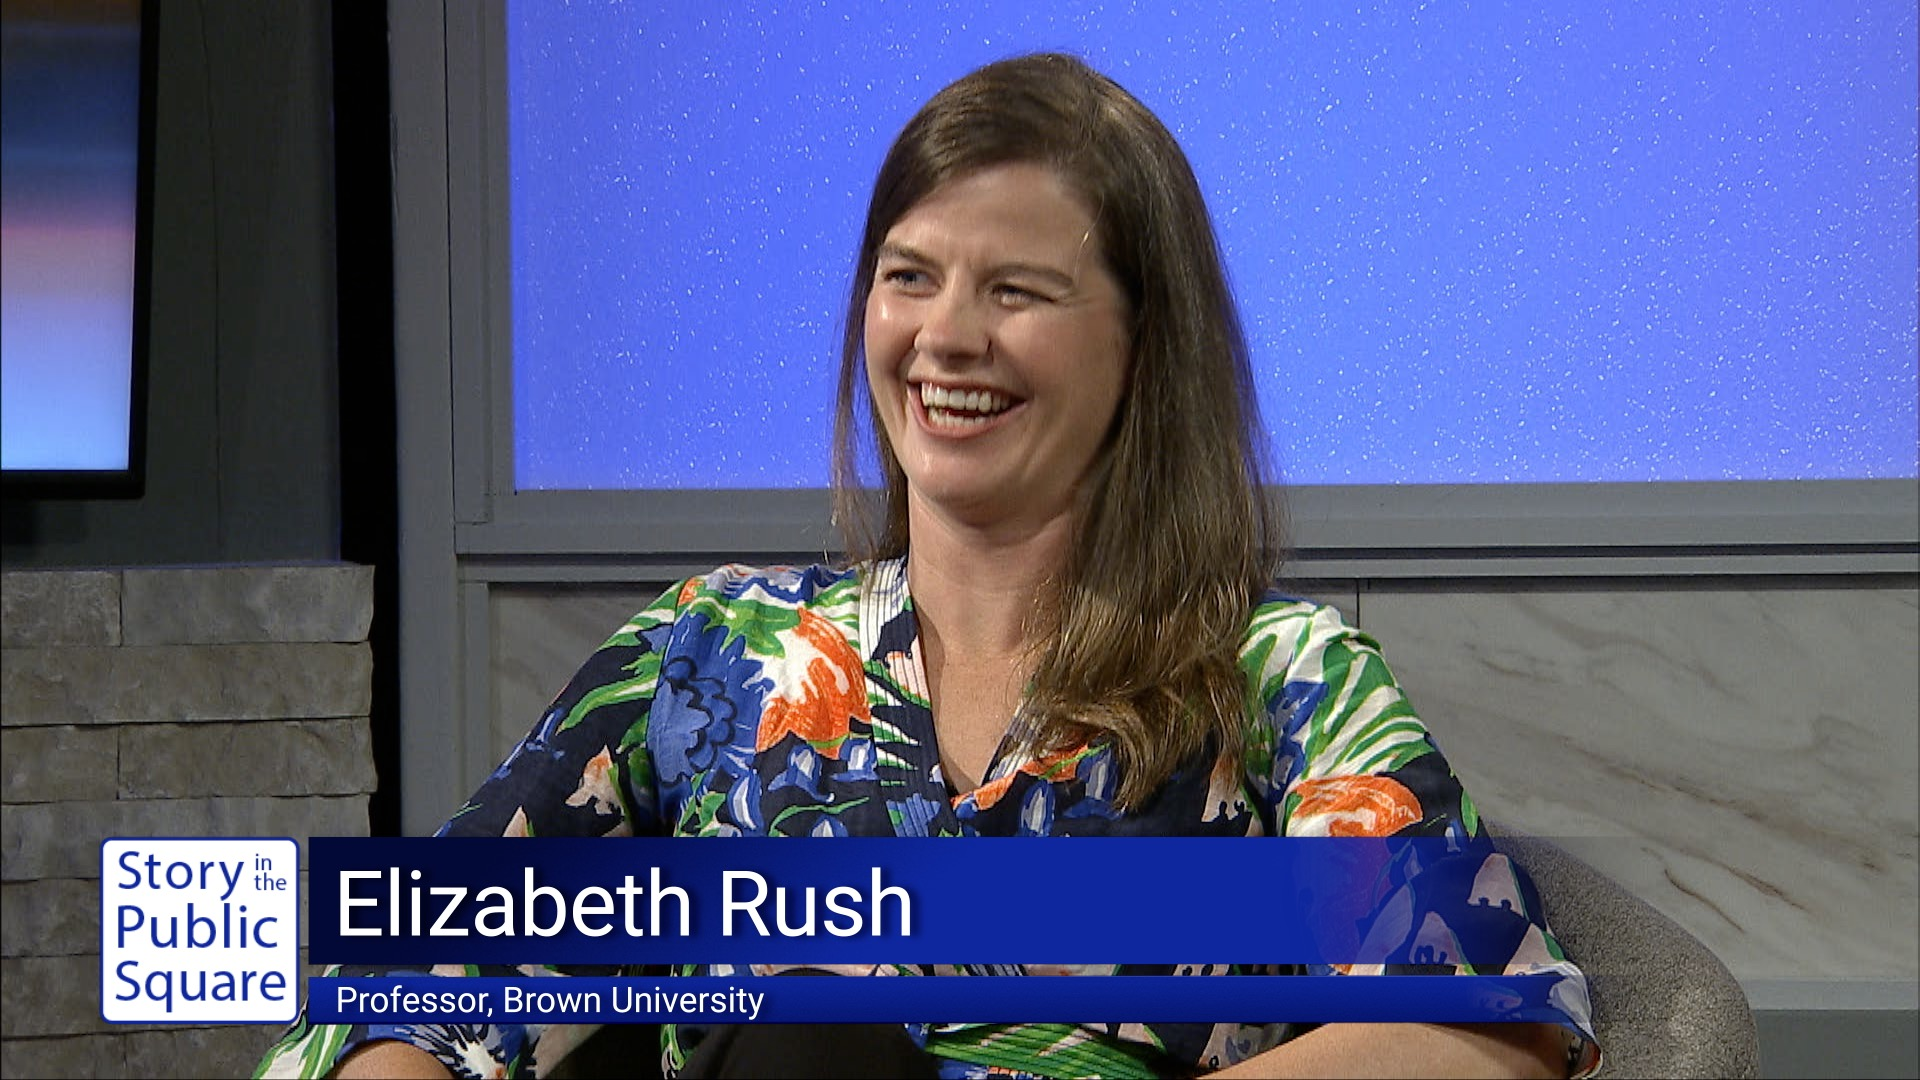 Elizabeth Rush Investigates the Impacts of Climate Change with a Journey to the End of the Earth